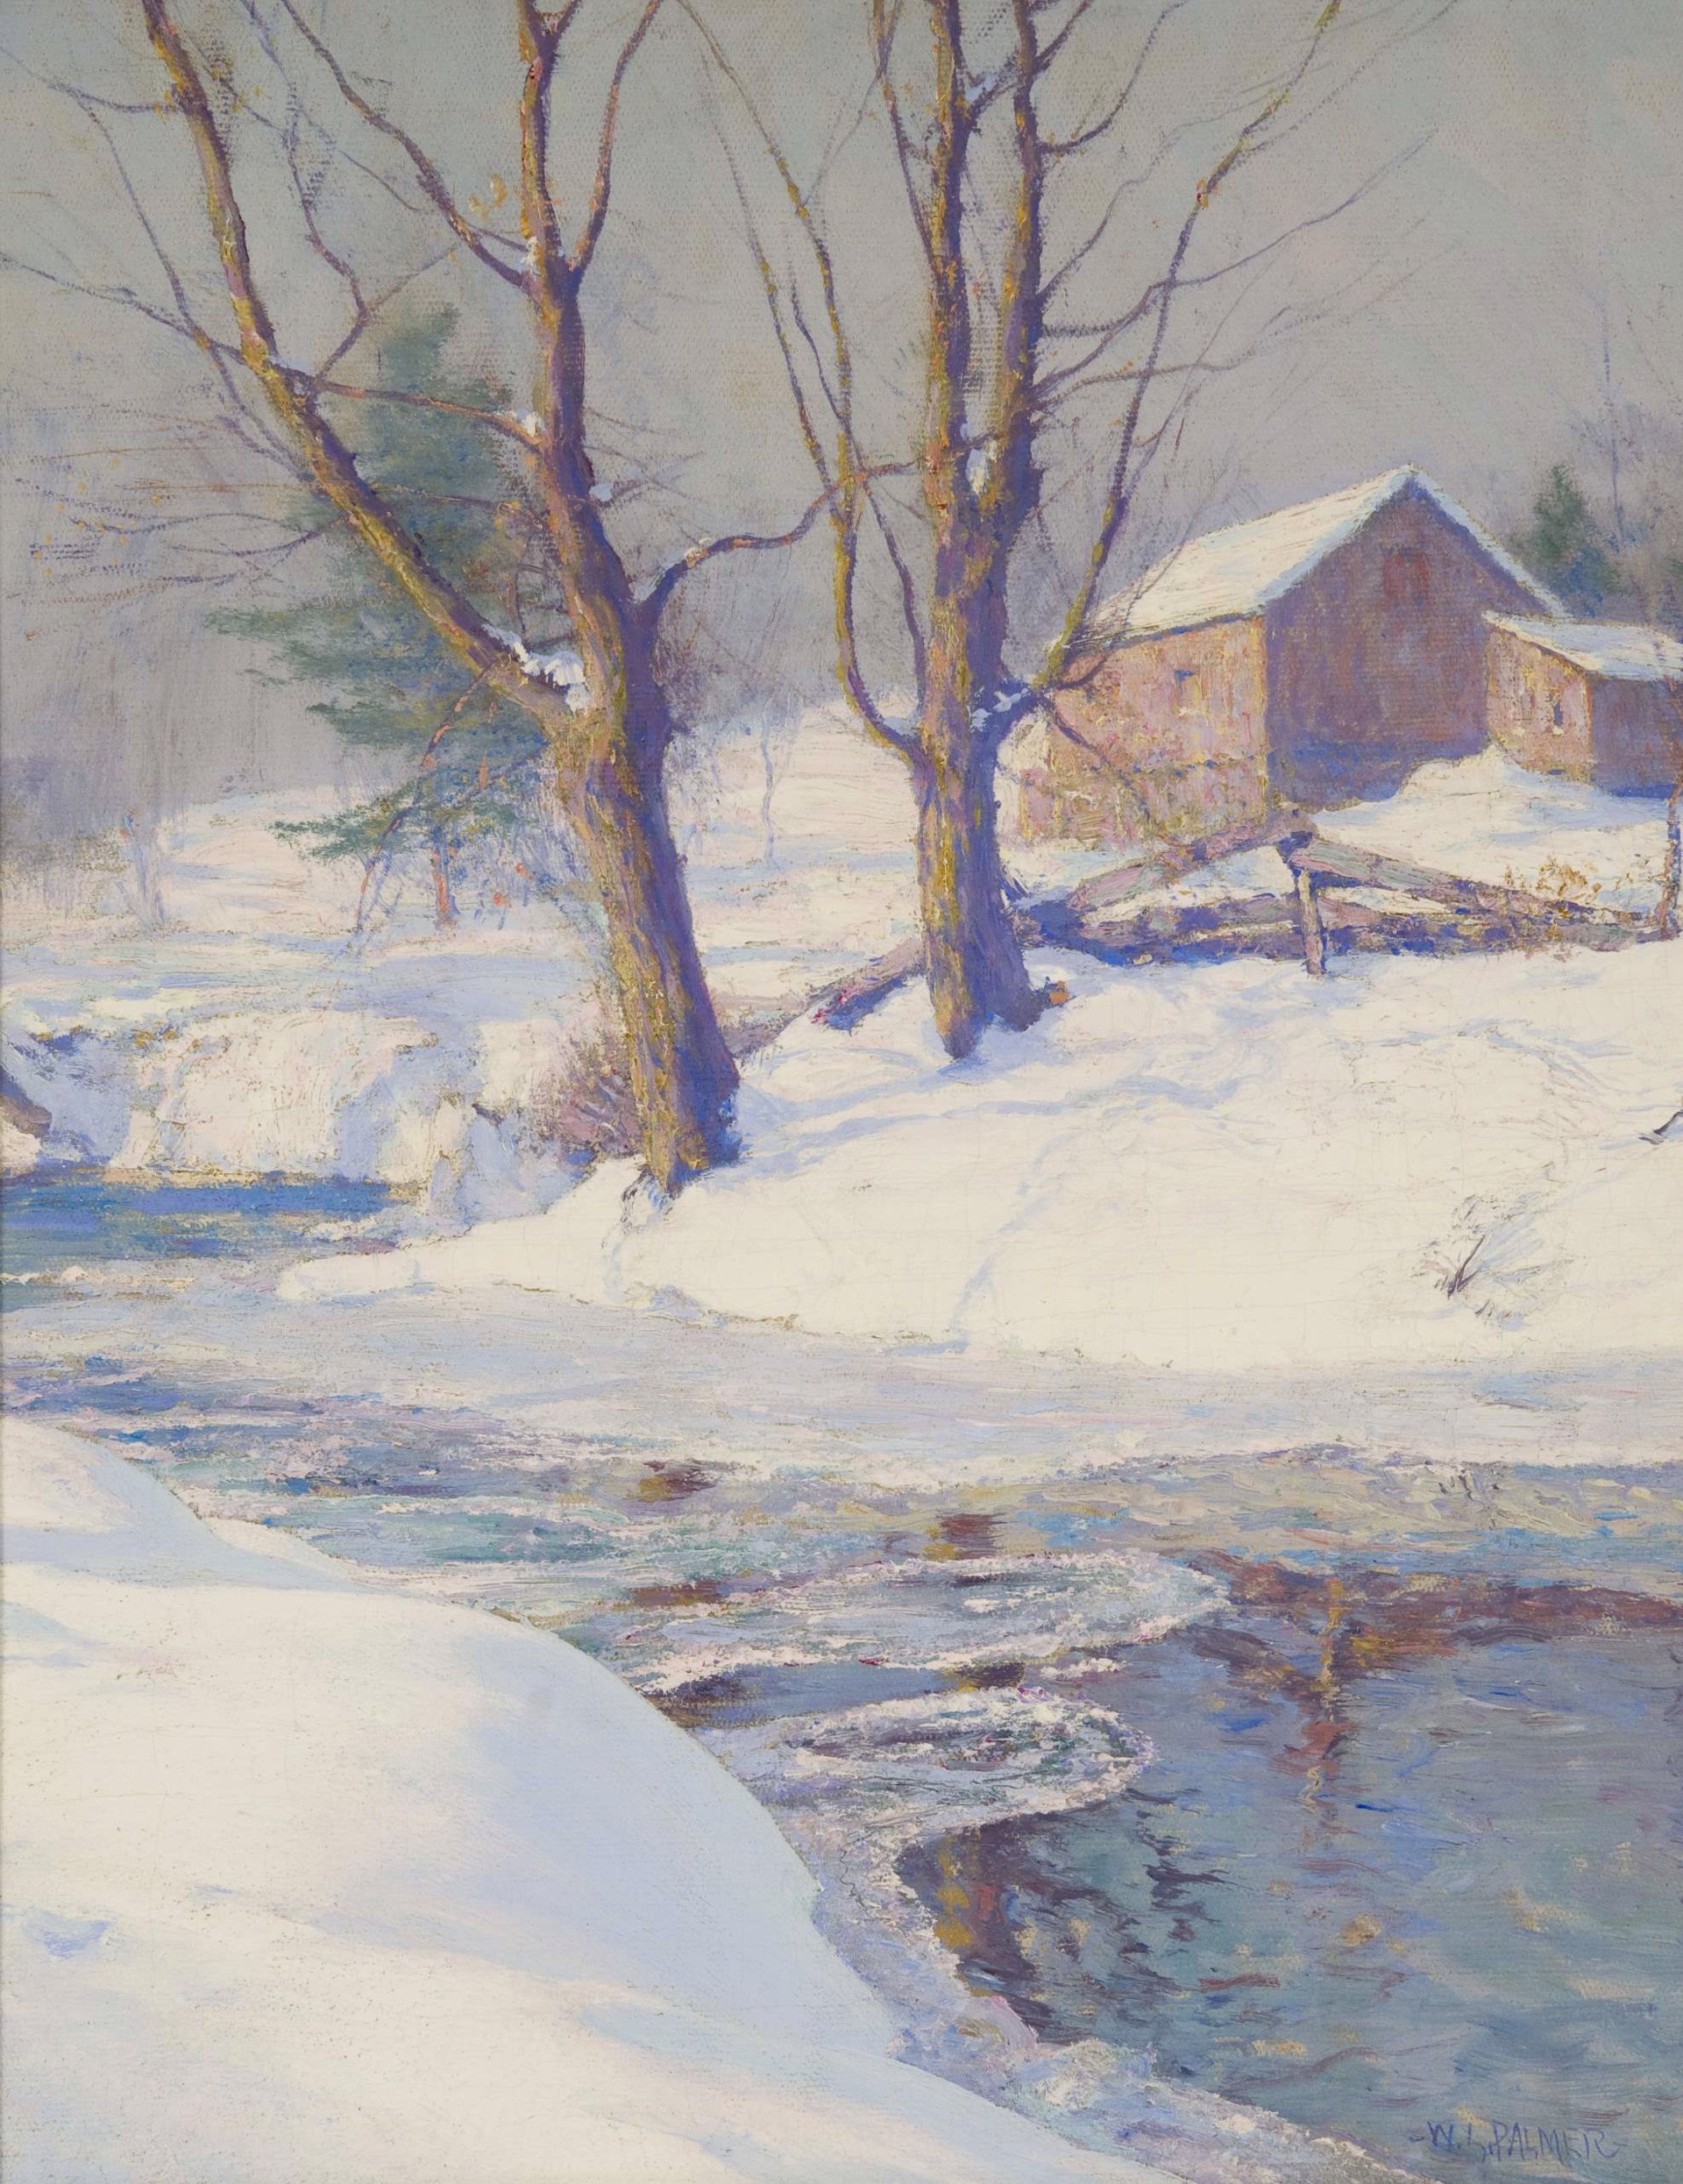 The Red Barn by Walter Launt Palmer